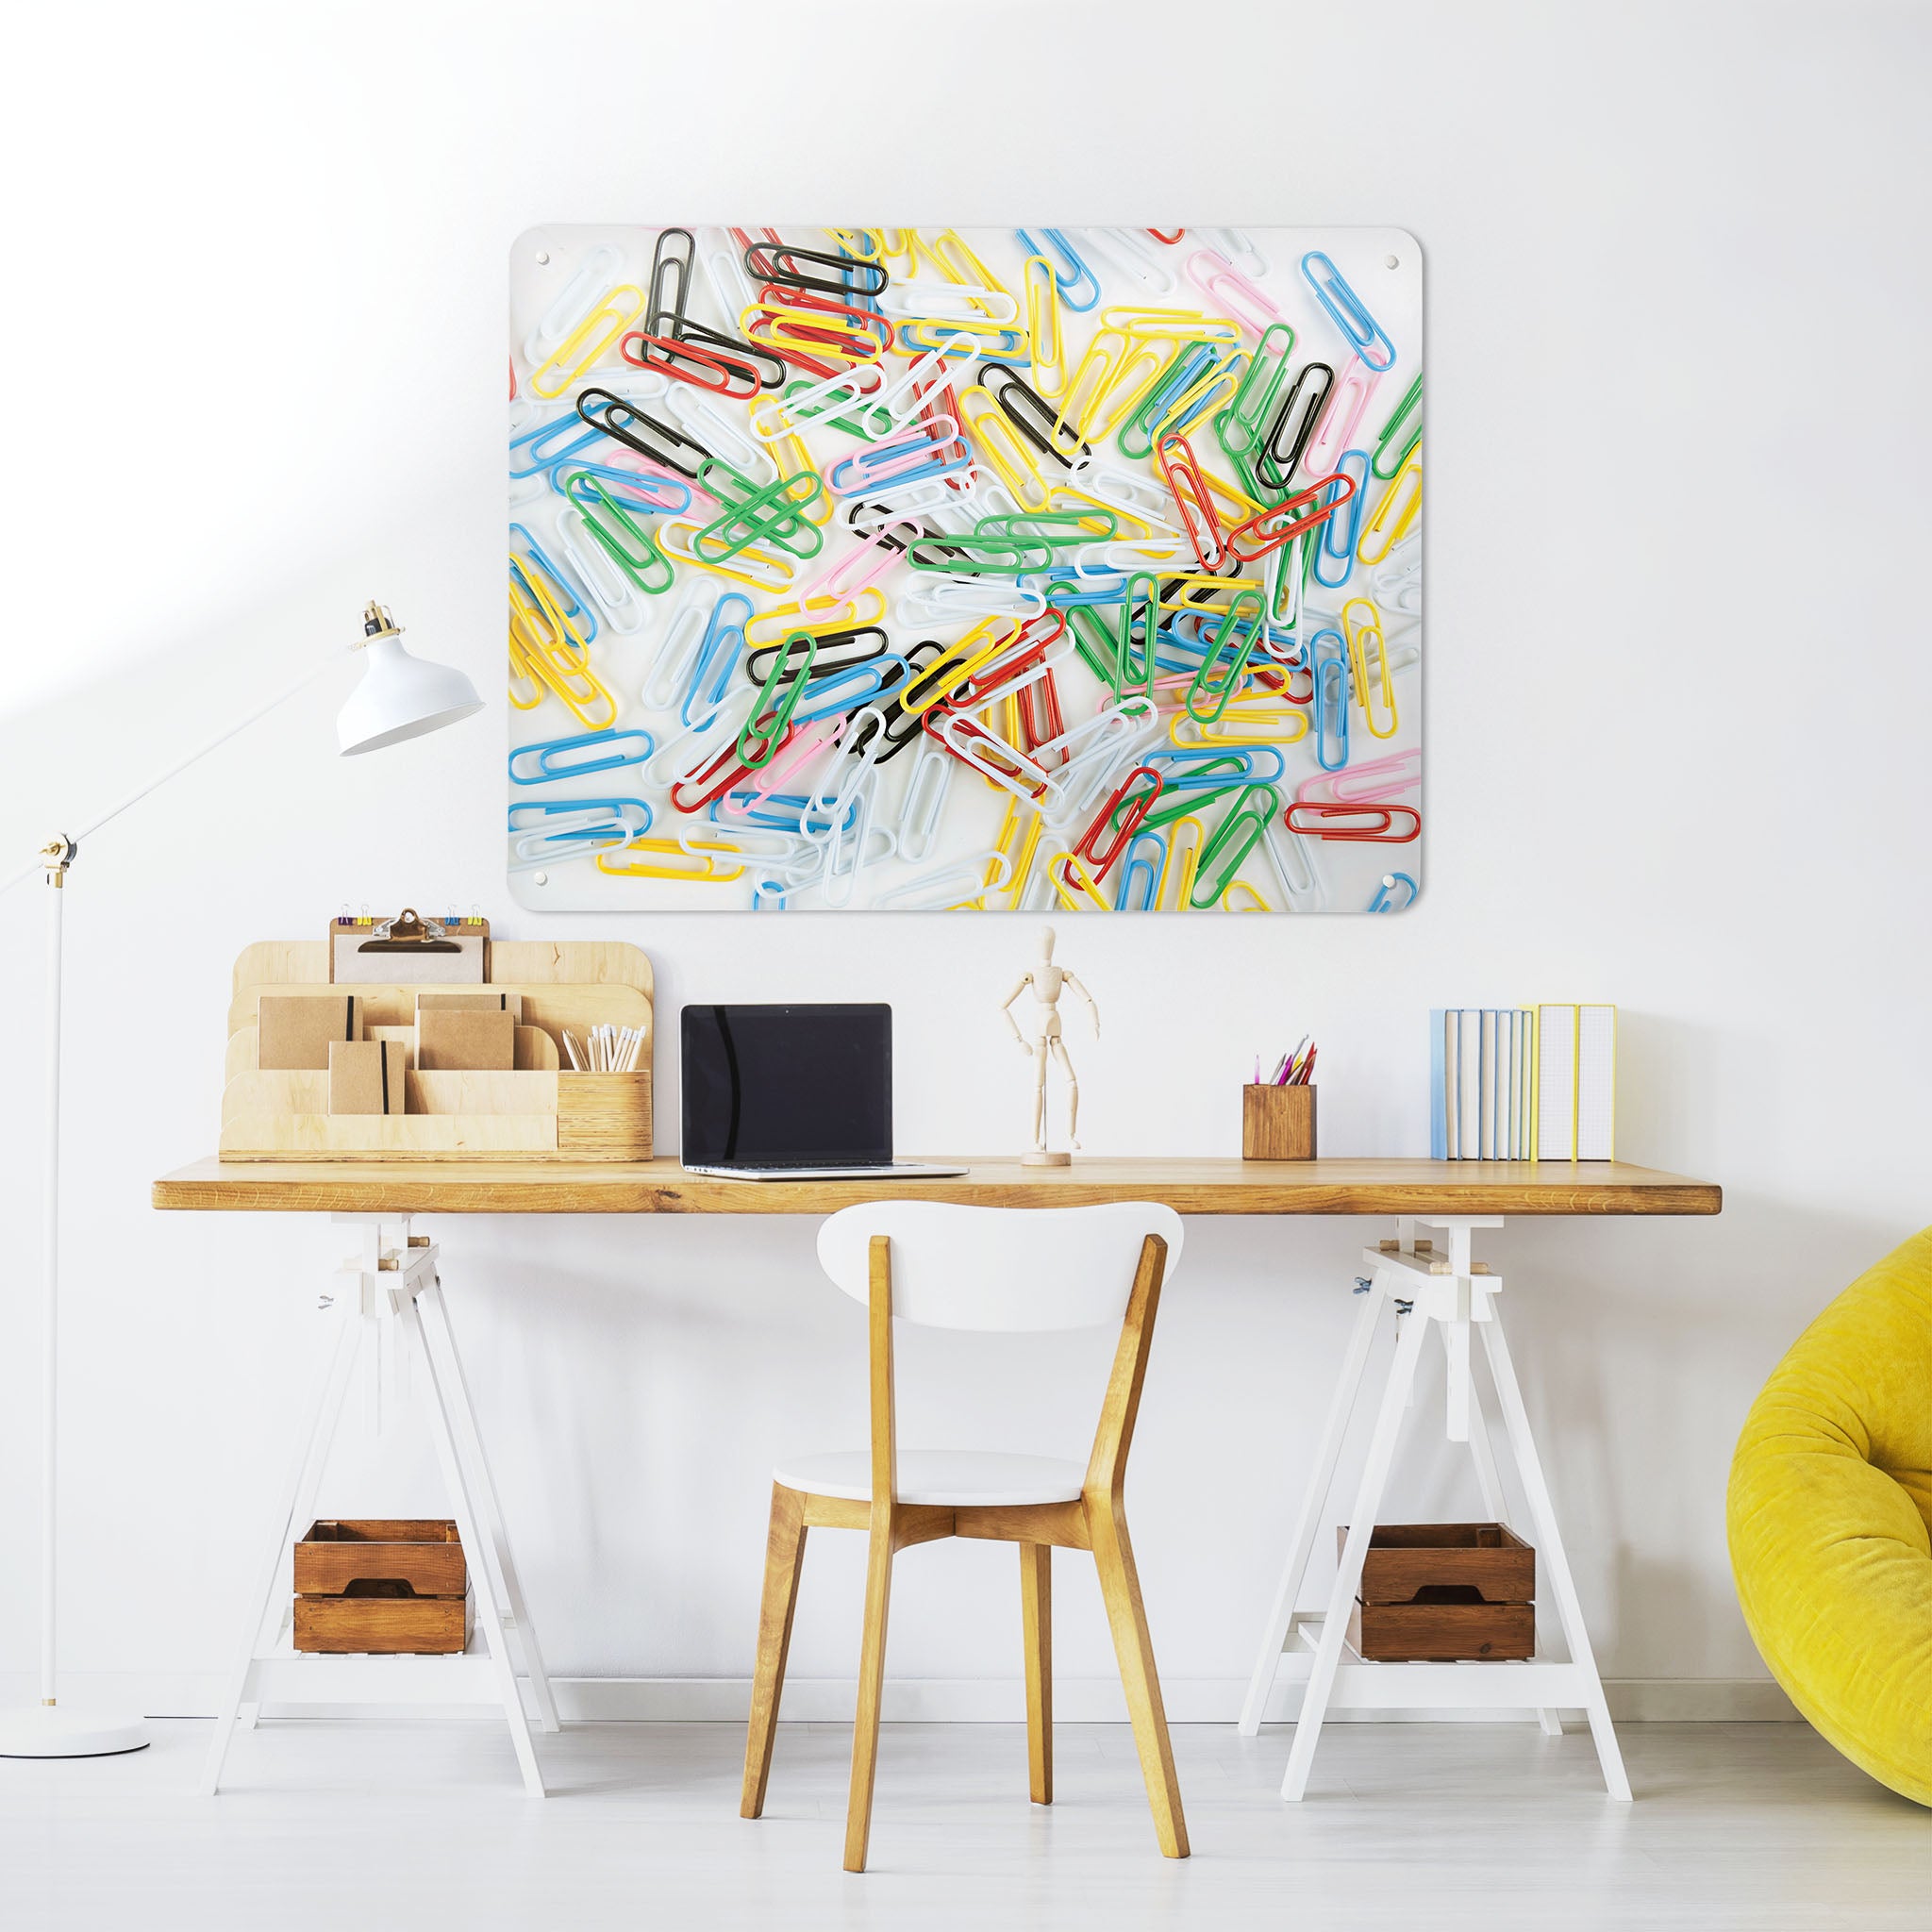 A desk in a workspace setting in a white interior with a magnetic metal wall art panel showing a photograph of multi coloured paper clips on a white background